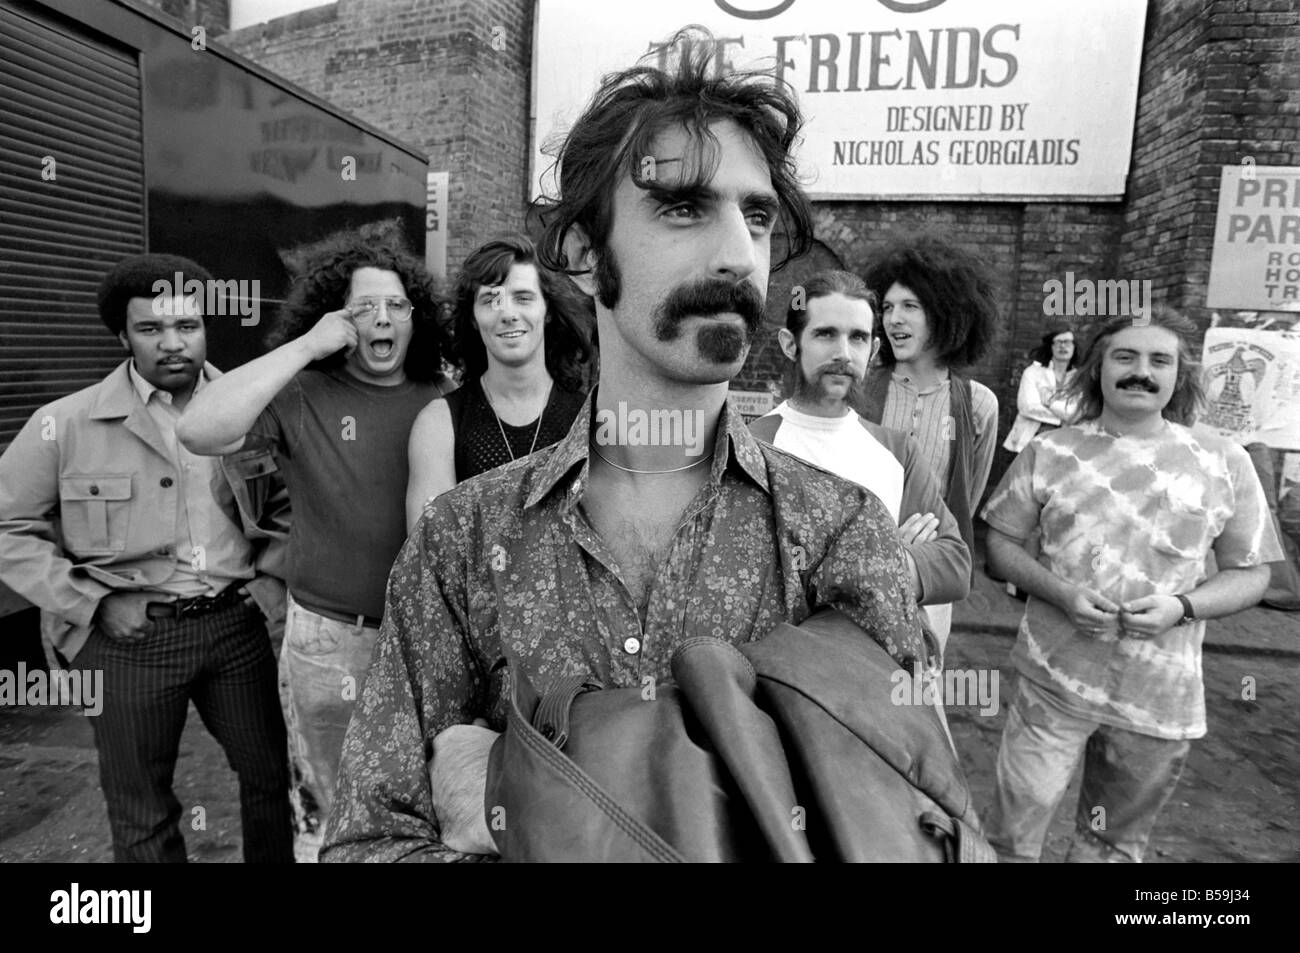 Frank Zappa. Another American rock group hits London town: Frank Zappa and his outfit the Mothers of Invention are at present on tour in the U.K. next weekend they visit the Bath Pop Festival. Yesterday Sunday they saw some of the sights of London, which included a visit to the Round House Entertainment Centre in Camden town. The boys hail from Los Angeles: Frank Zappa (foreground), George Duke, Ian Underwood, Jeff Simmons, Mark Volman, Howard Kalen and Aynsley Dunbar. June 1970 70-5893-001 Stock Photo